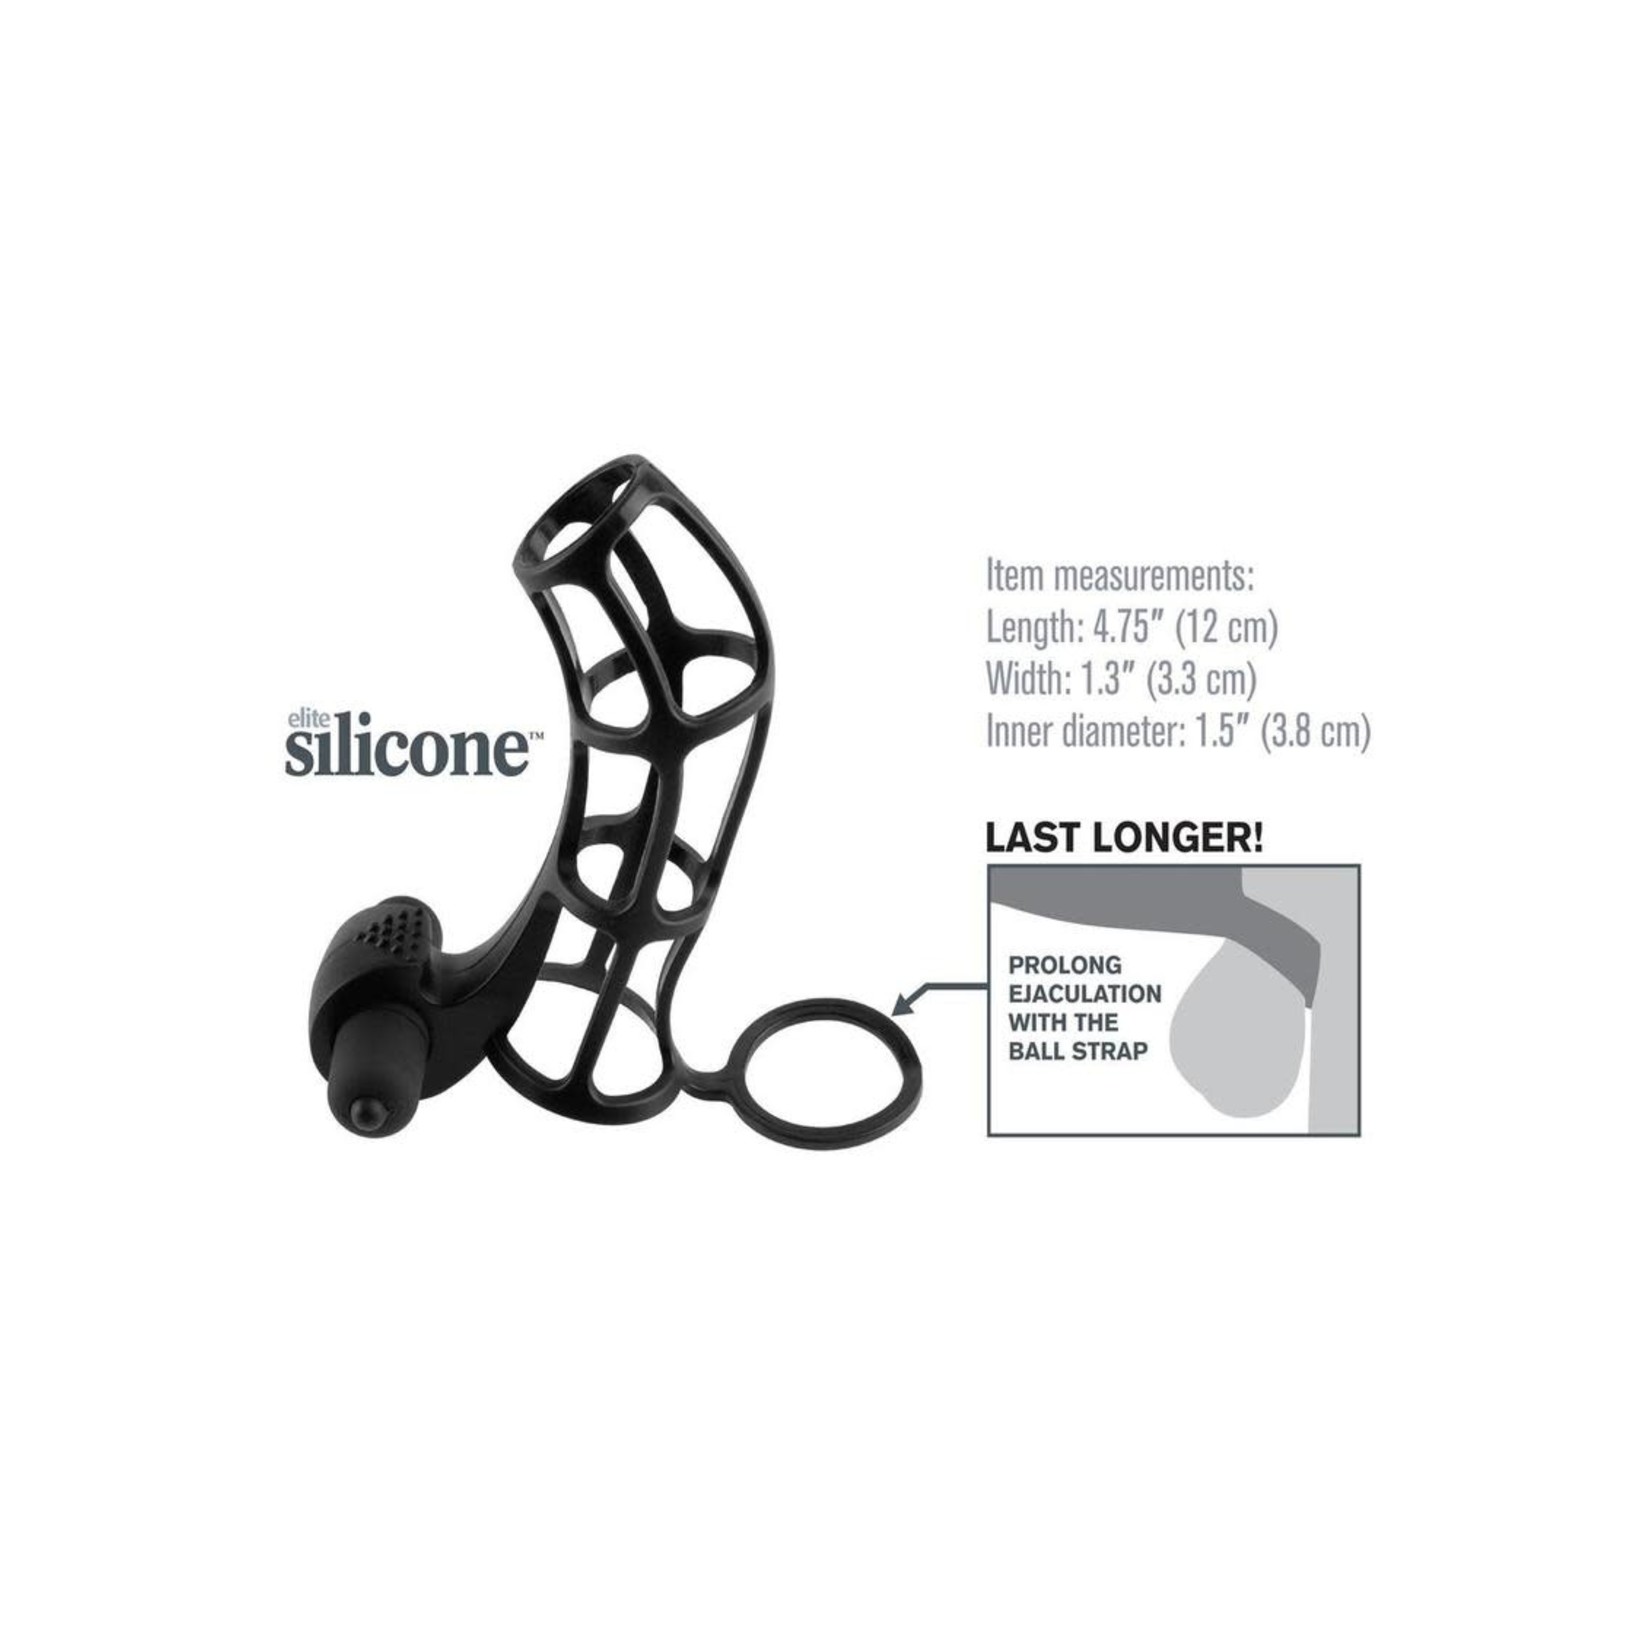 Fantasy Xtensions Silicone Deluxe Power Vibrating Cock Cage Black